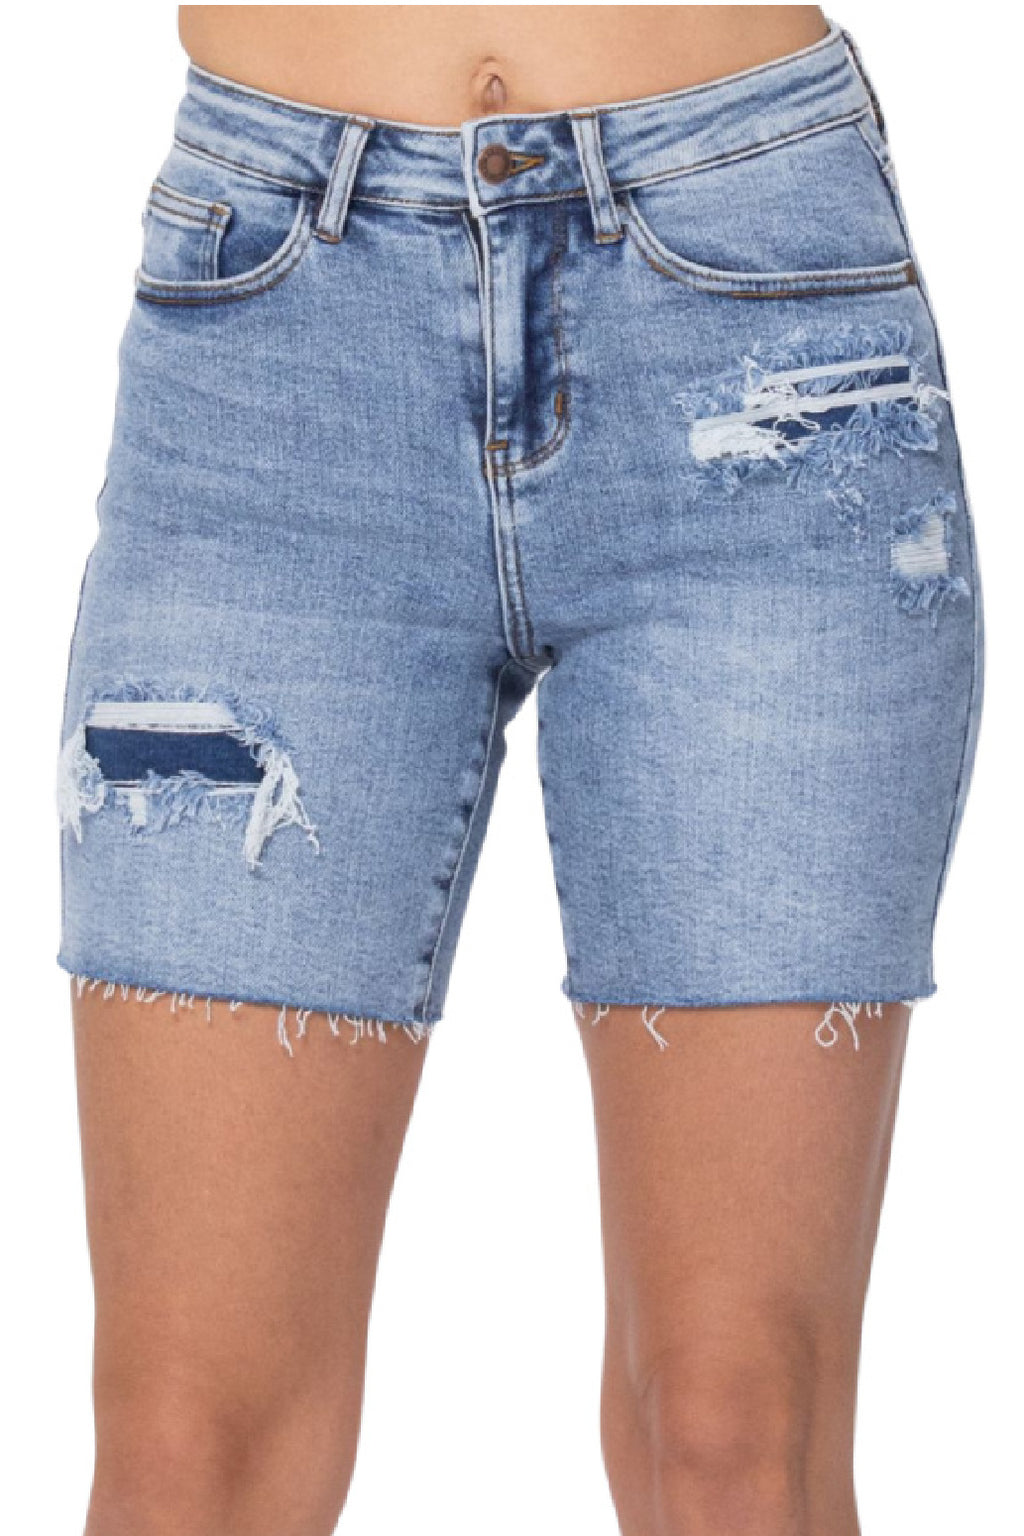 Judy Blue Denim Patch High Rise Mid Thigh Shorts Style 150094